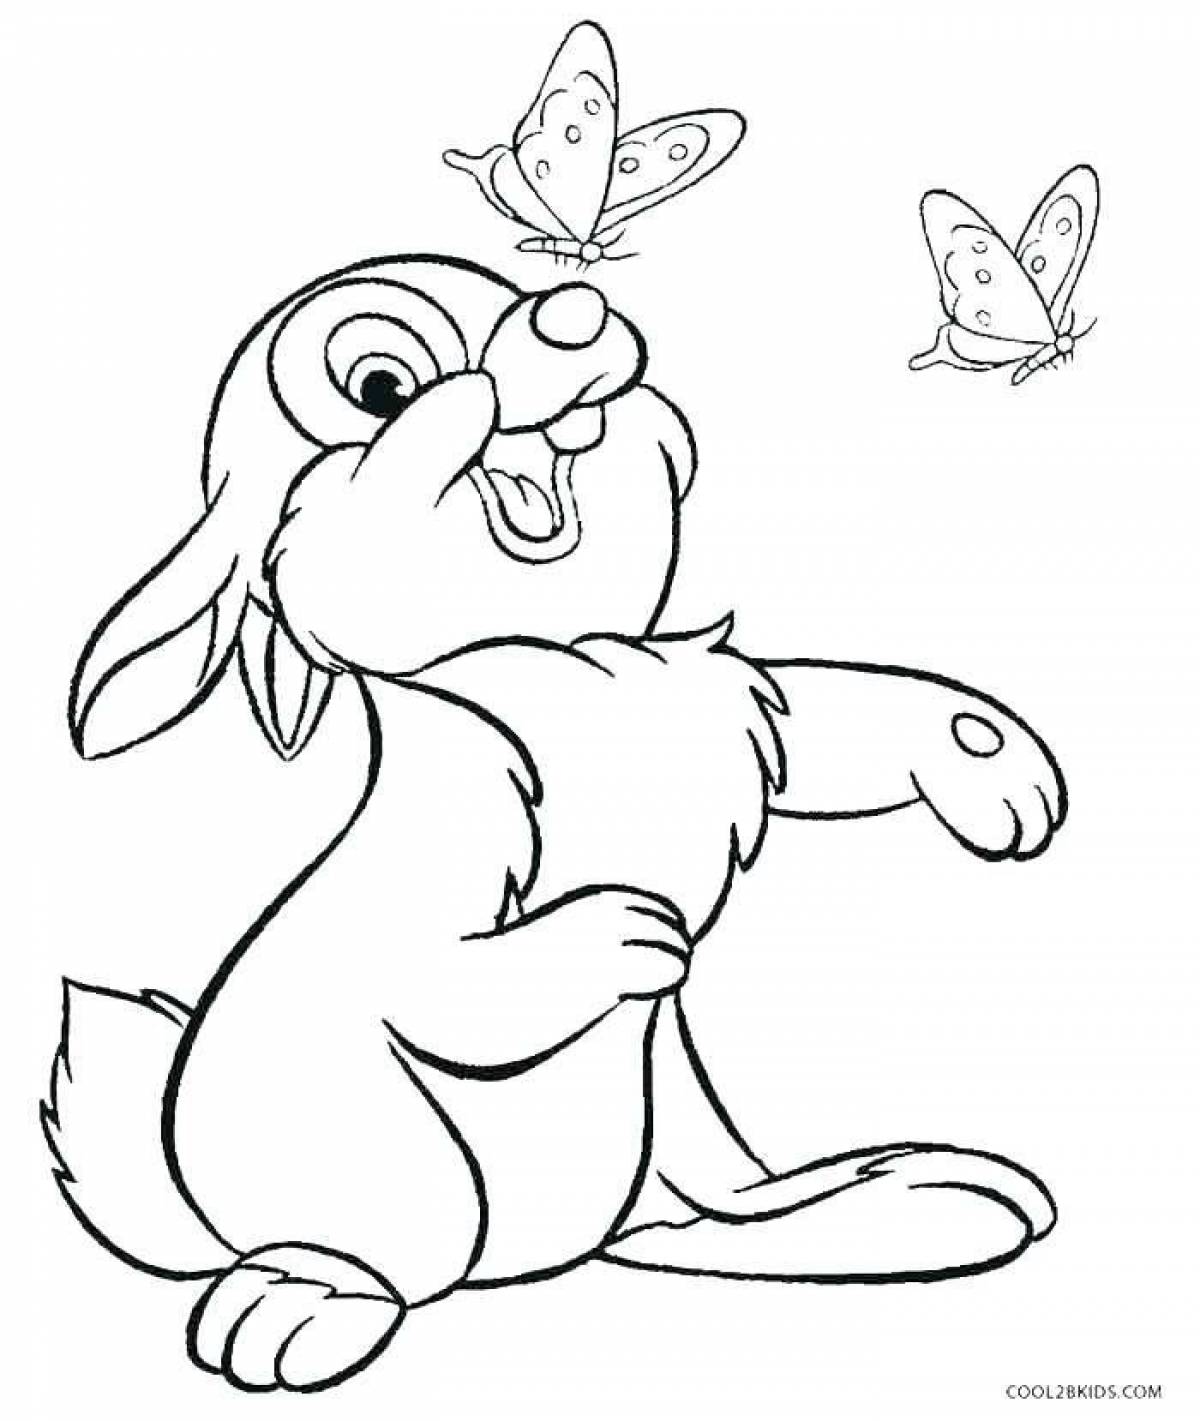 Smart bunny coloring book for kids